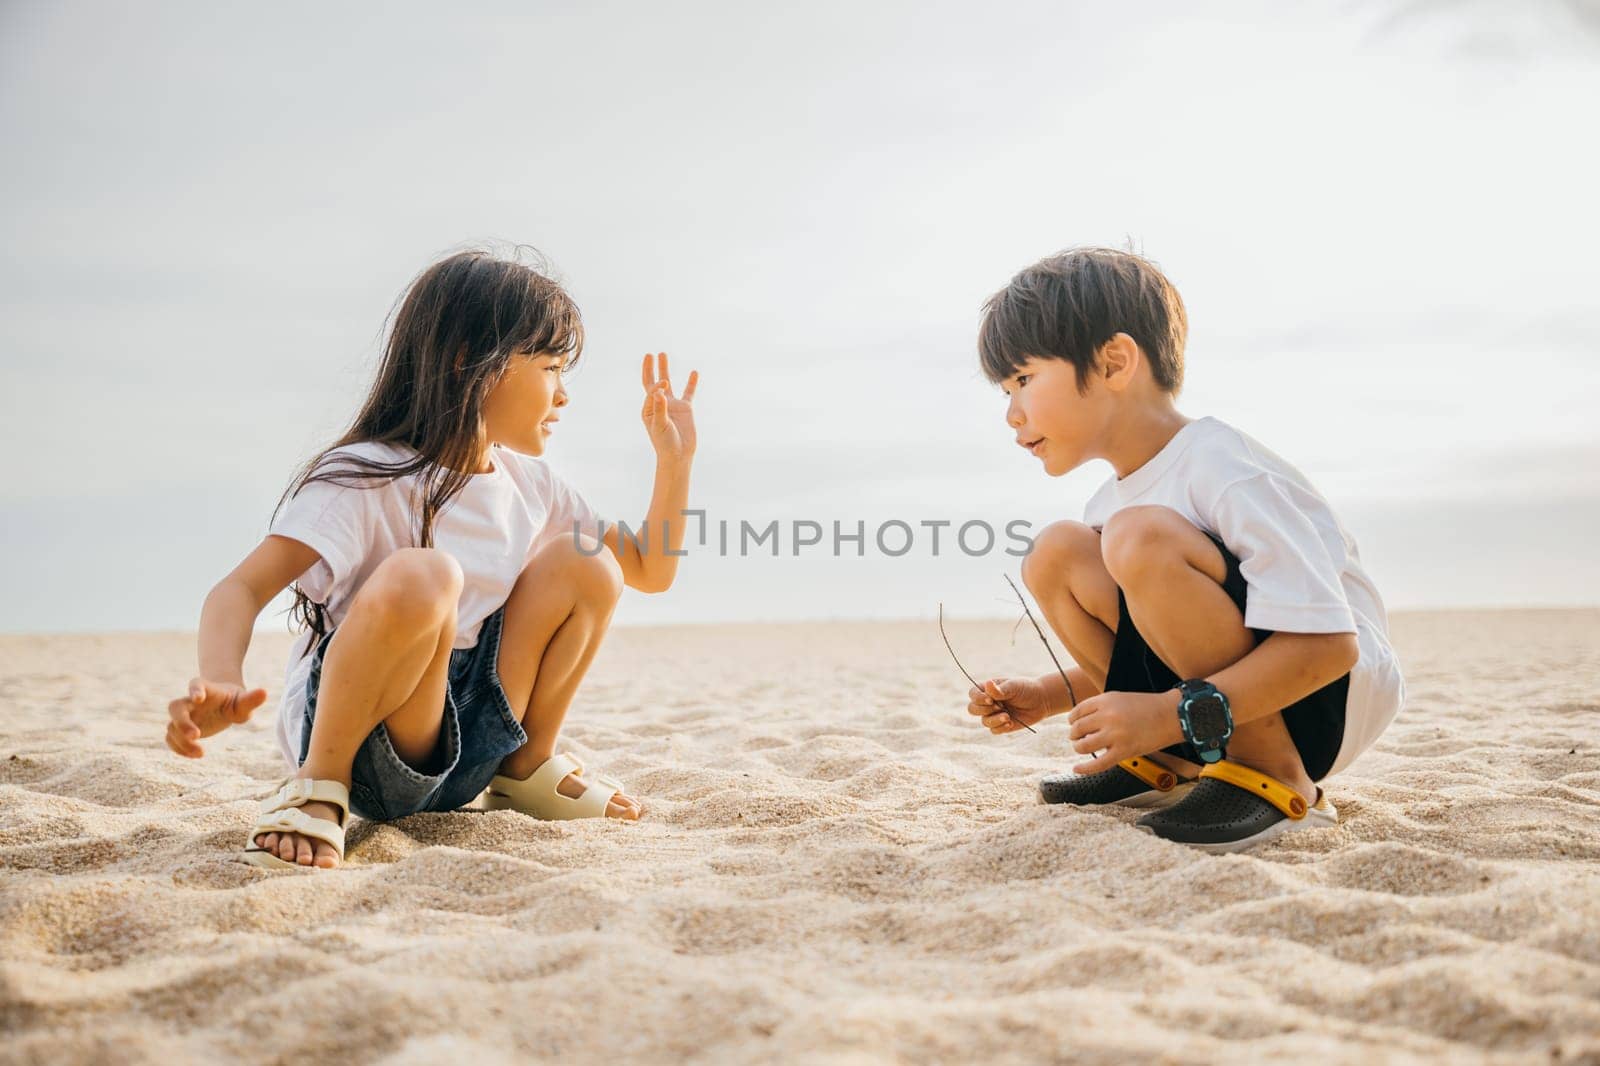 Children boy and girl having a blast on the beach playing with sand under the sunny sky. Family joy laughter and carefree moments captured in this delightful vacation concept. by Sorapop